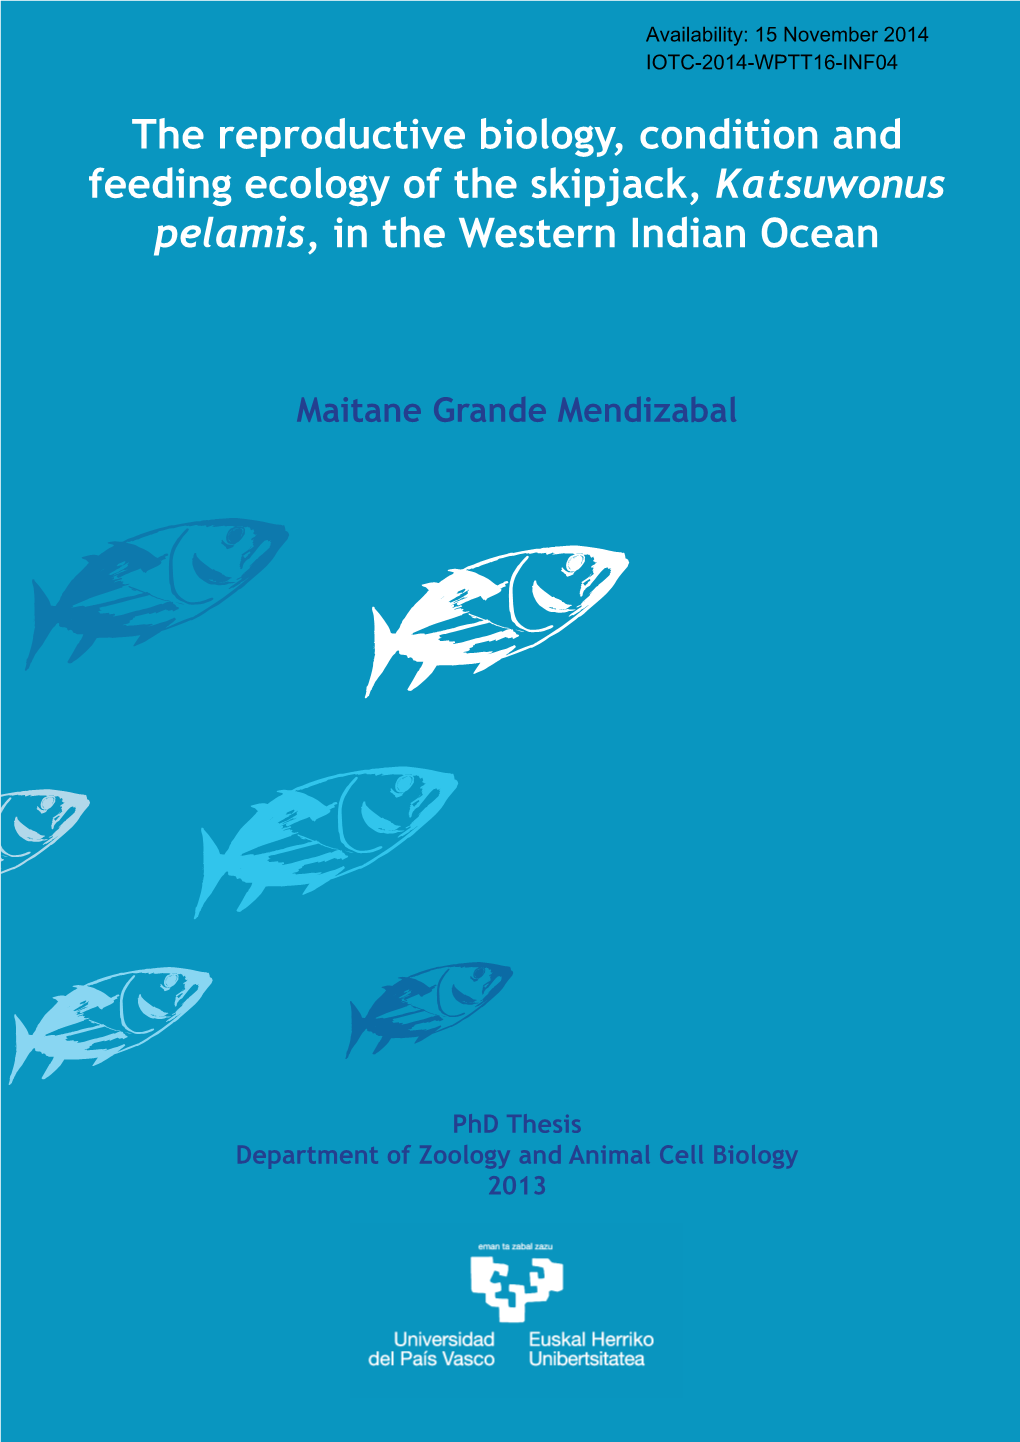 The Reproductive Biology, Condition and Feeding Ecology of the Skipjack, Katsuwonus Pelamis, in the Western Indian Ocean